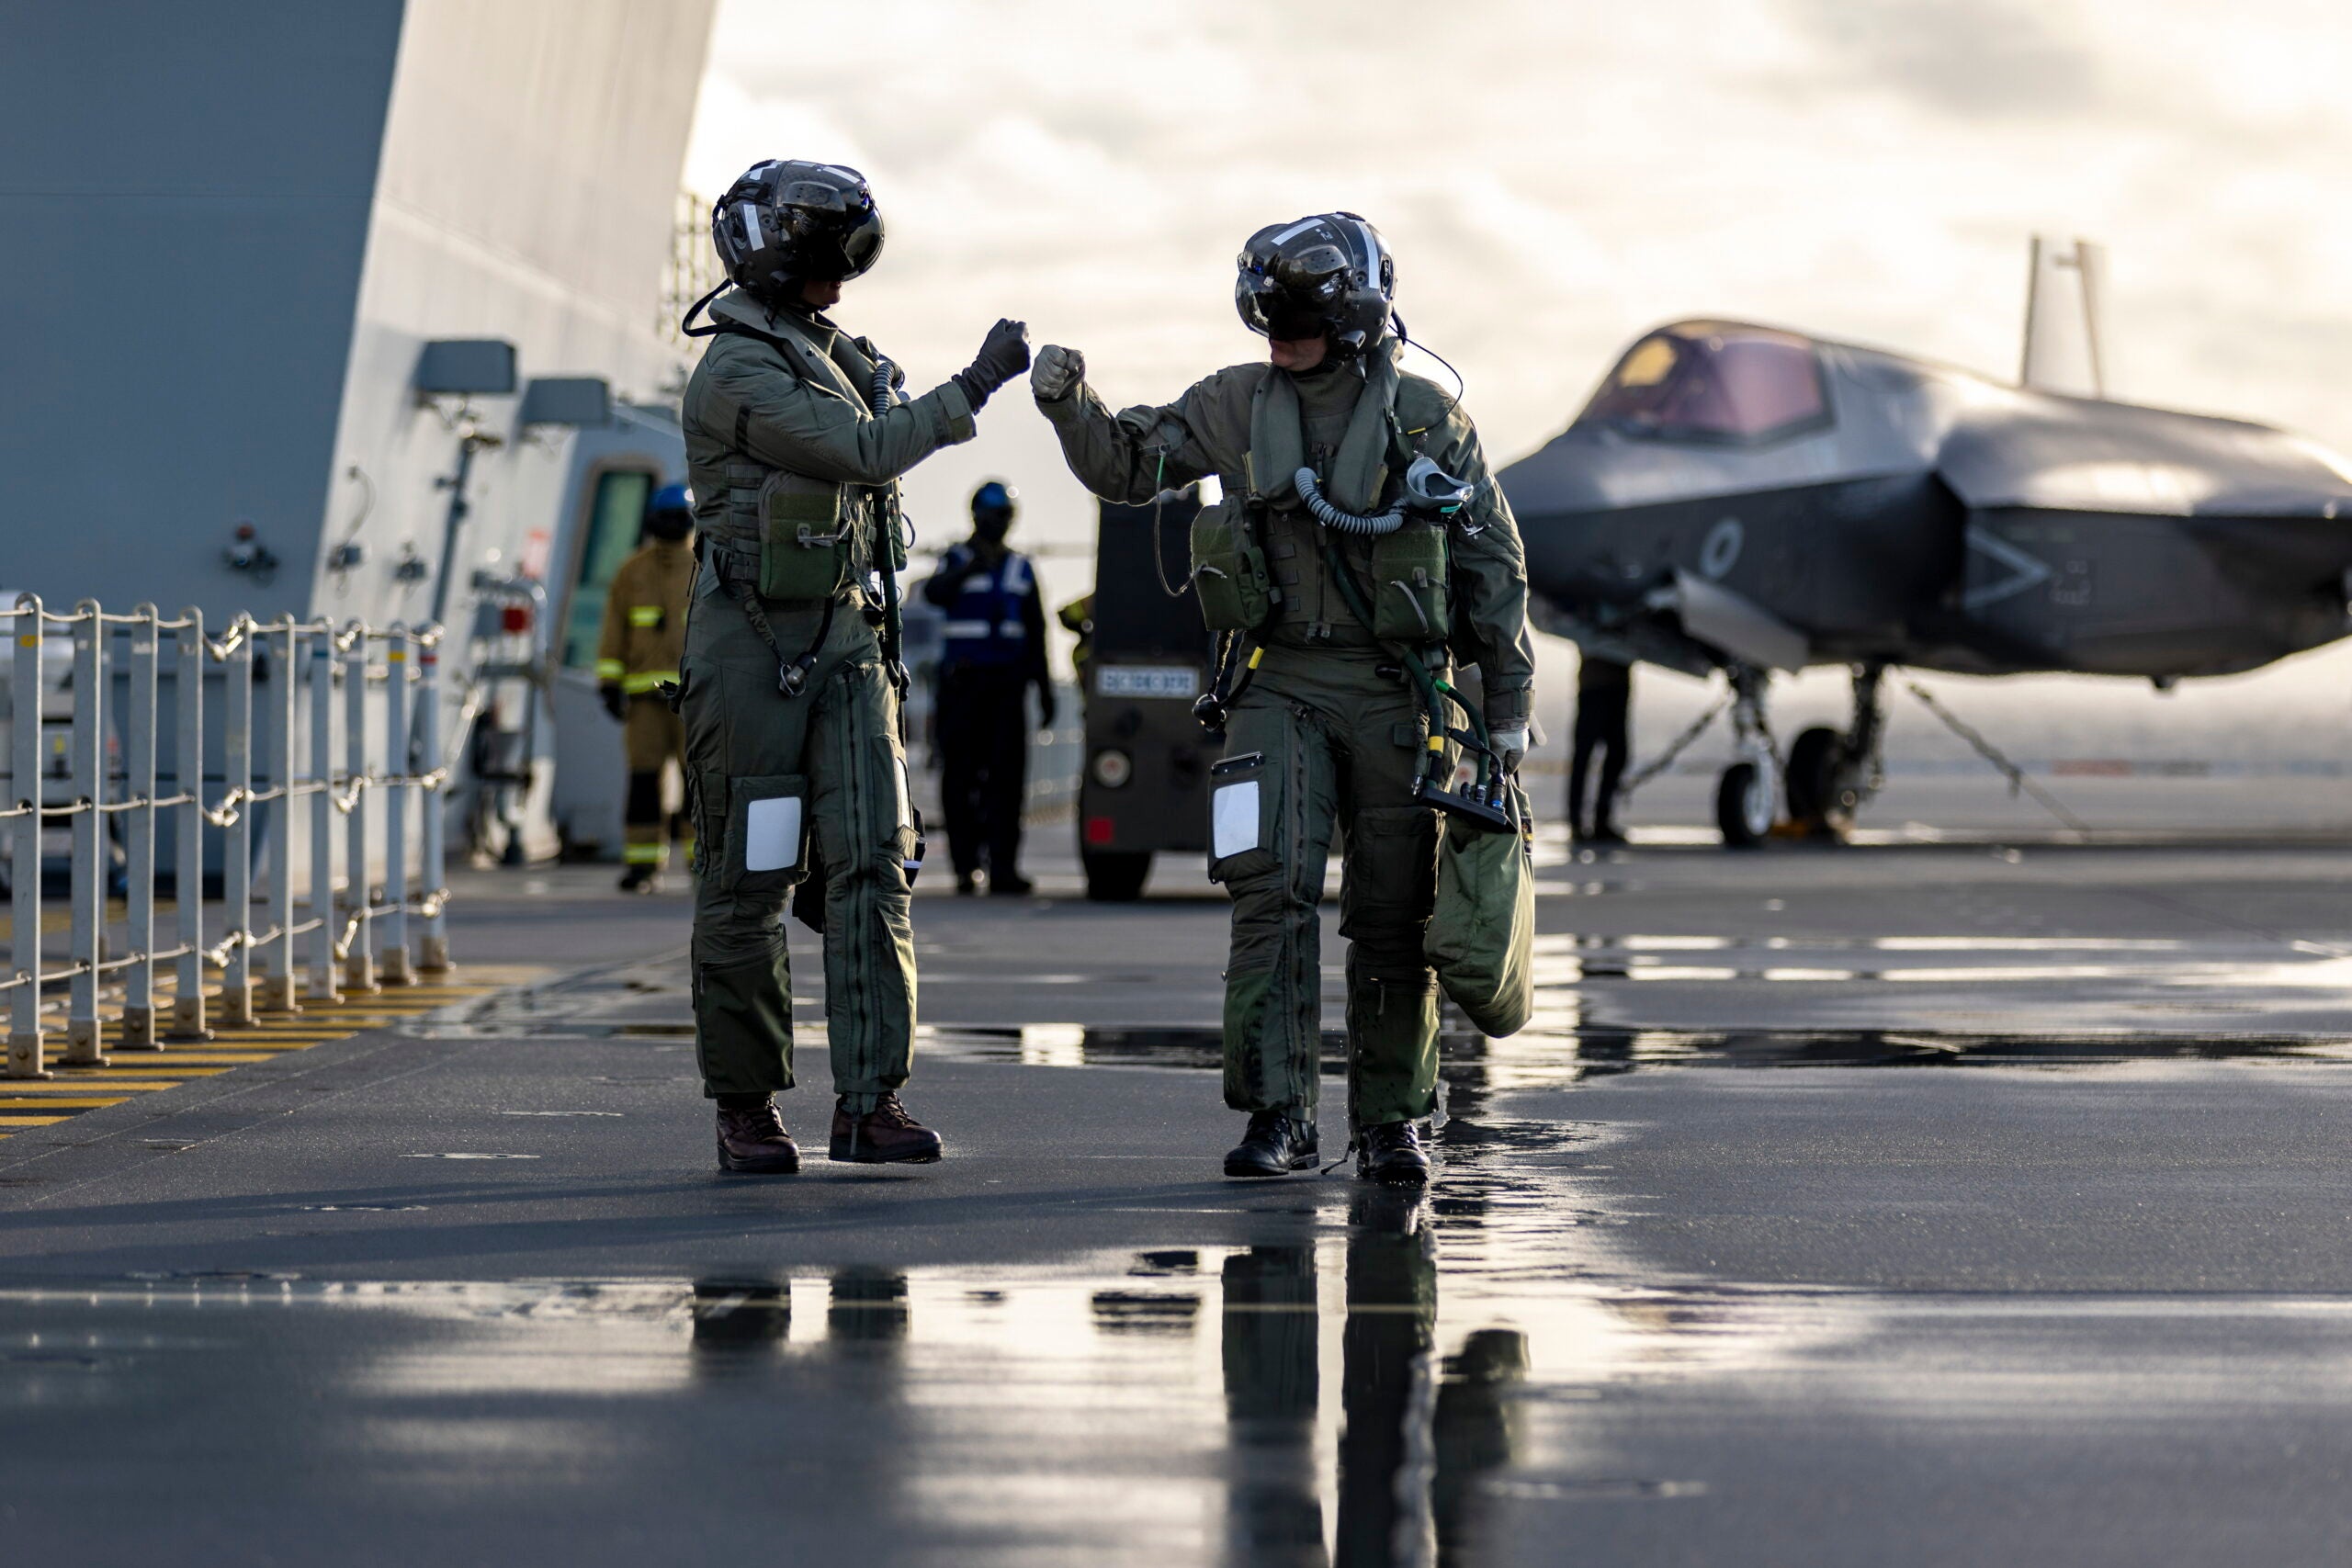 Pictured: Pilots fist bump on the Flight Deck of HMS Queen Elizabeth during Exercise Phoenix Strike.

Exercise Phoenix Strike is a Norwegian led exercise with the UK, integrating our combined 5th generation capability and Norwegian Special Forces, in a variety of mission sets. 

These include practicing Air-to-Air Tactical Intercepts, Offensive Combat Air (OCA) and Suppression of Enemy Air Defences (SEAD). 

The sorties will involve departing from HMS QUEEN ELIZABETH to rendezvous with a Voyager in northern Norway. This will enable the UK F-35 to refuel, before entering into the exercise which extends down the majority of the Norwegian coast. 

The exercise affords us the opportunity to practice common tactics with 5th generation partner nations, demonstrating the interoperability of the F-35 program.